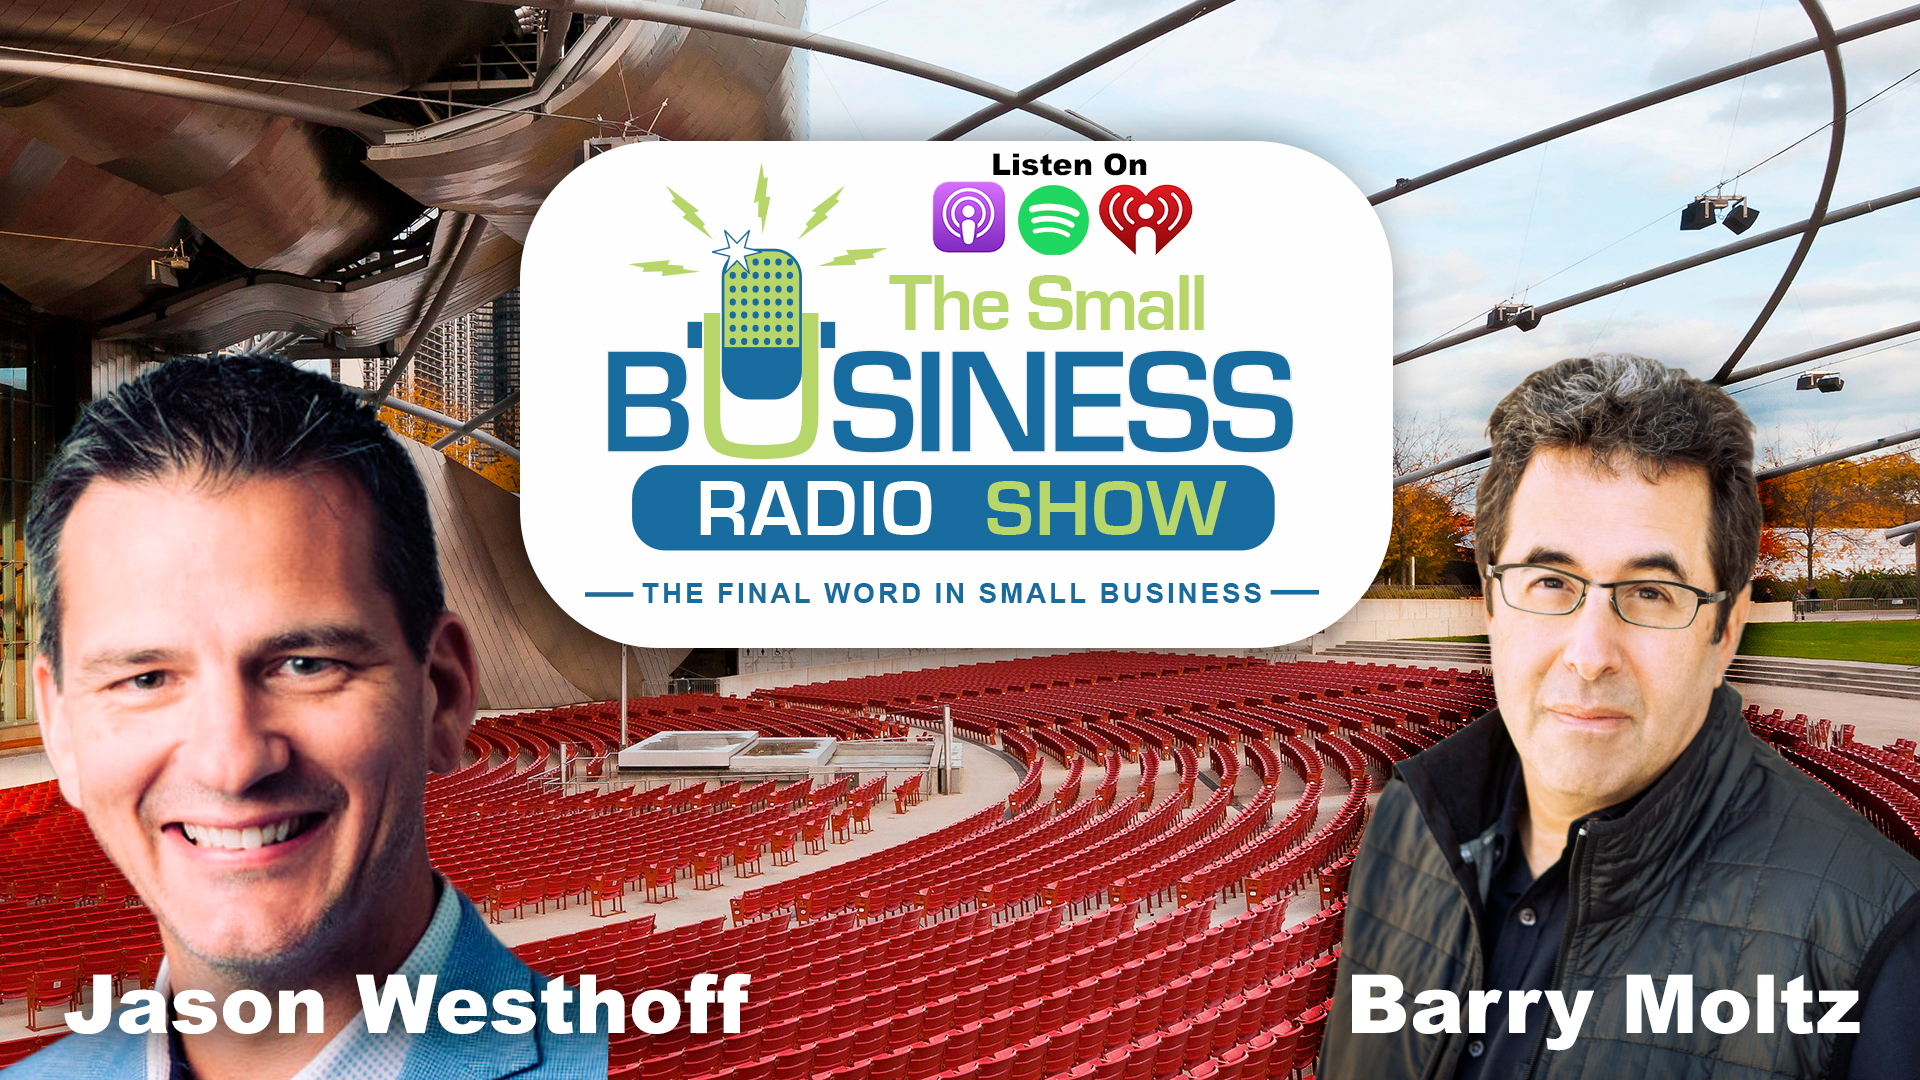 Jason Westhoff on The Small Business Radio Show